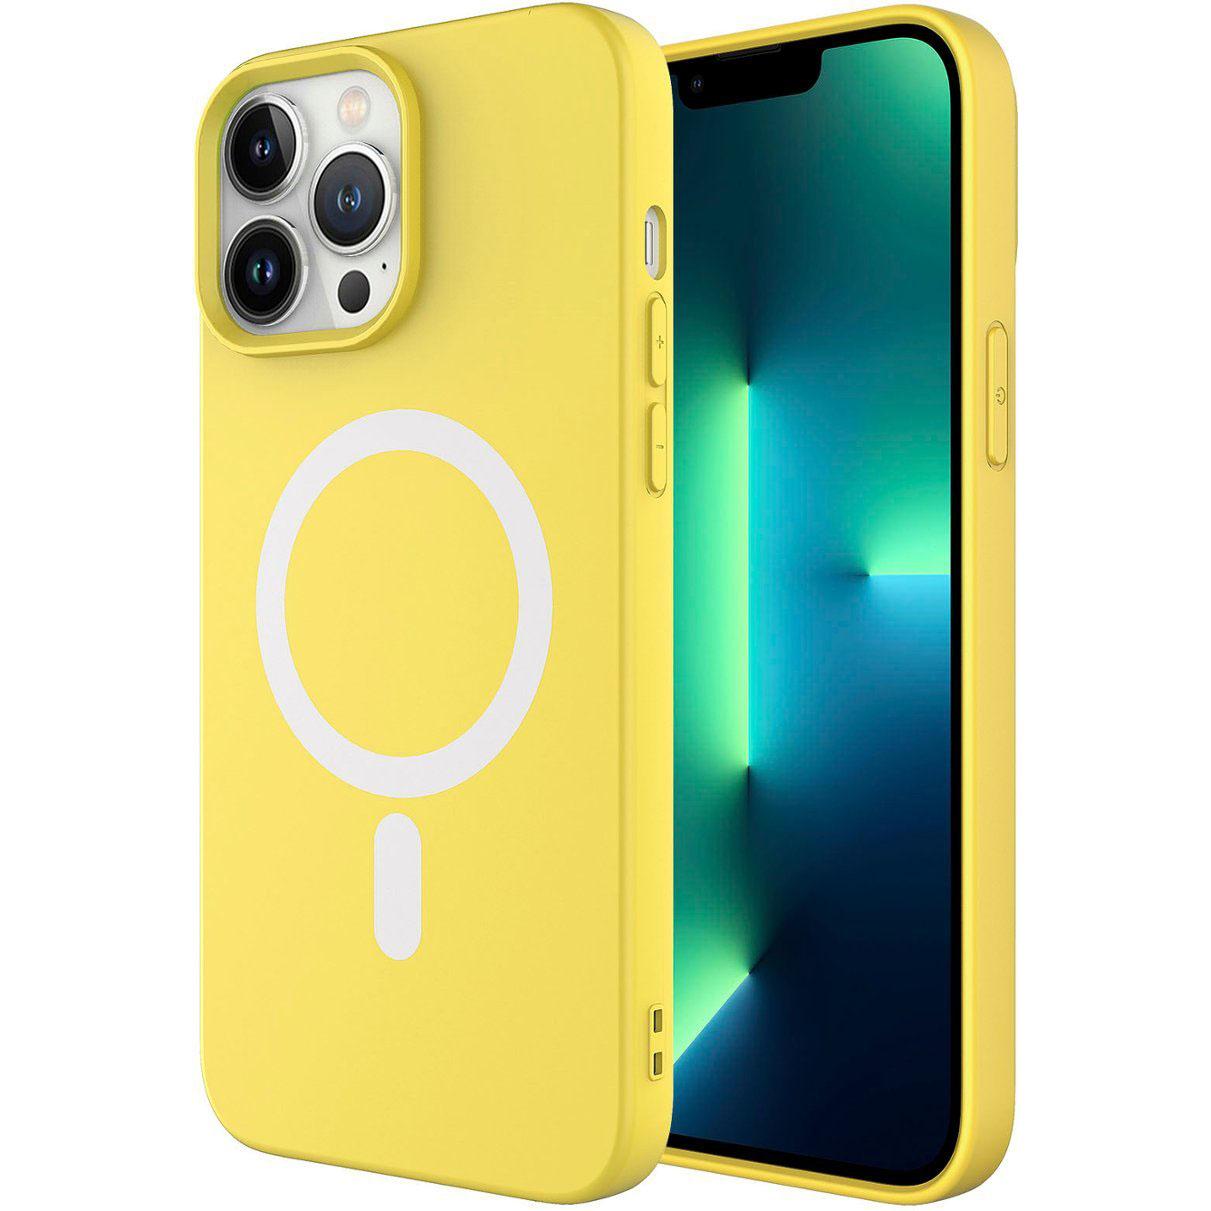 Apple iPhone 12 and 13 Pro Max Cases for $9.99